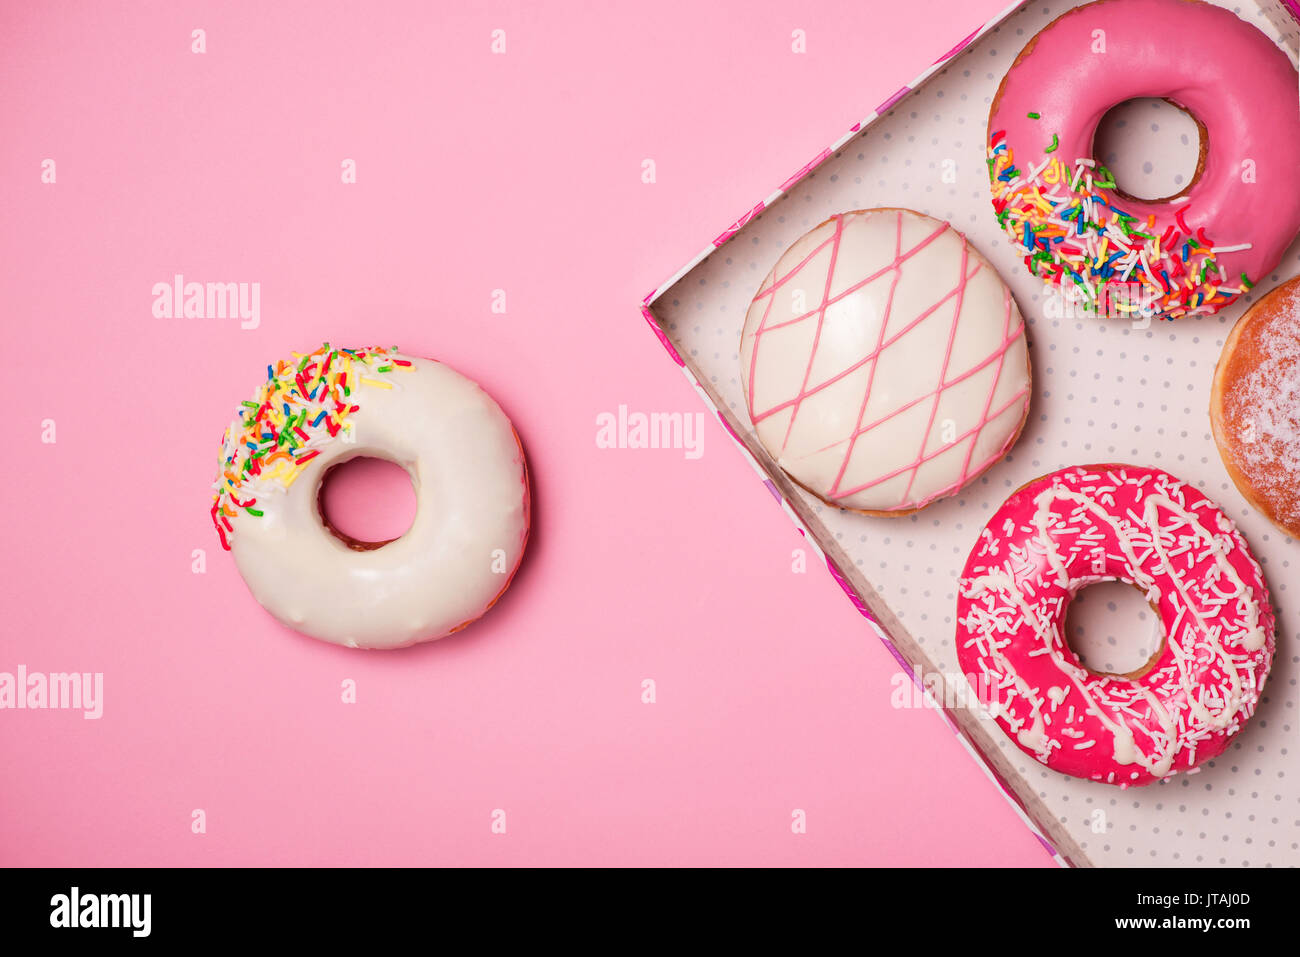 Donuts with icing on pastel pink background. Sweet donuts. Stock Photo